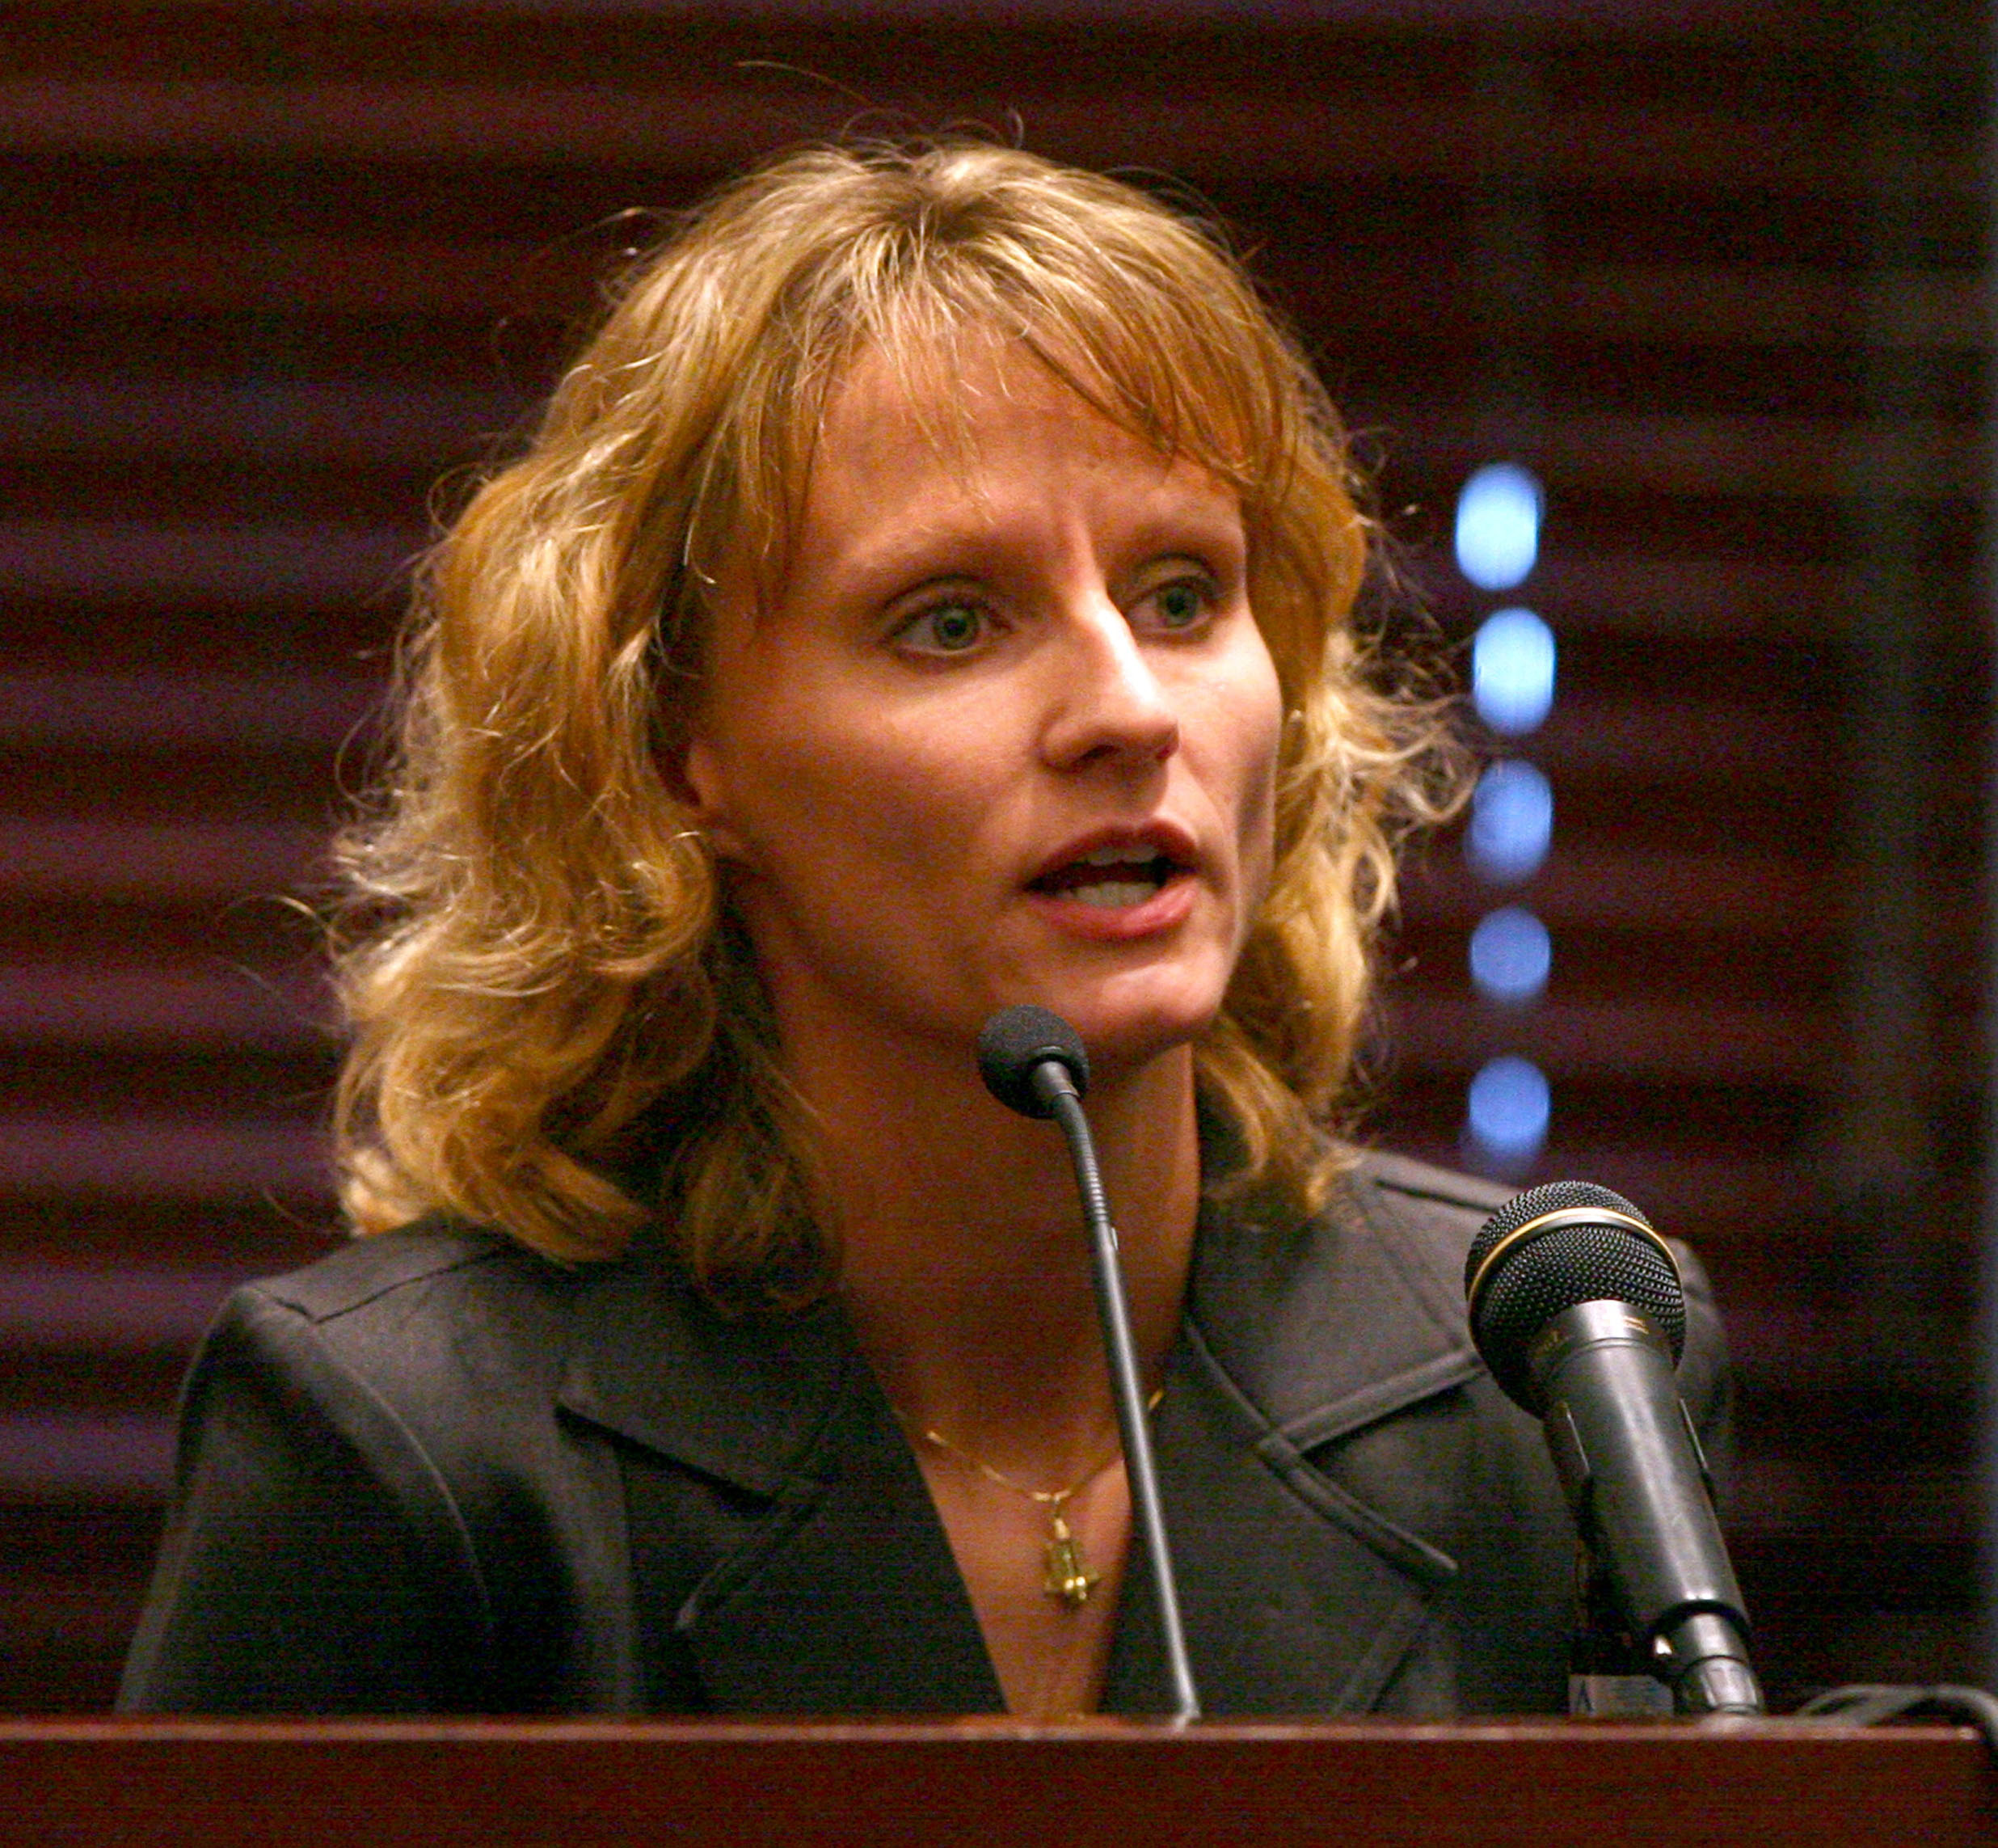 Air Force Capt. Colleen Shipman testifies at the hearing for former NASA astronaut Lisa Nowak, Friday, August 24, 2007, at the Orange County courthouse in Orlando, Florida. (Red Huber/Orlando Sentinel/Tribune News Service via Getty Images)